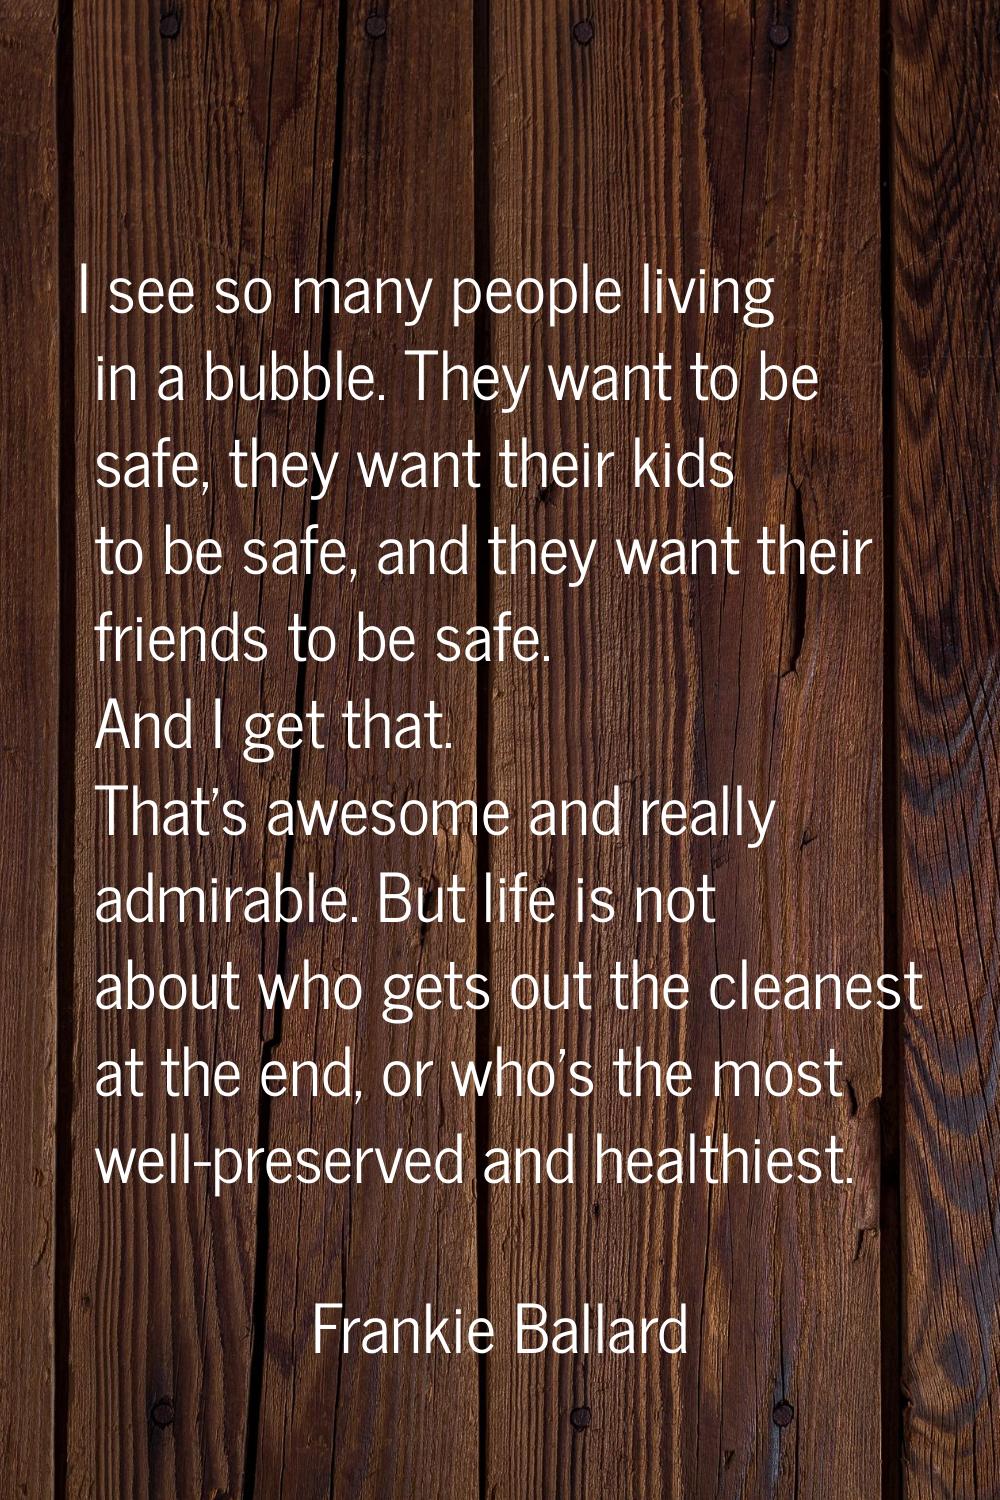 I see so many people living in a bubble. They want to be safe, they want their kids to be safe, and